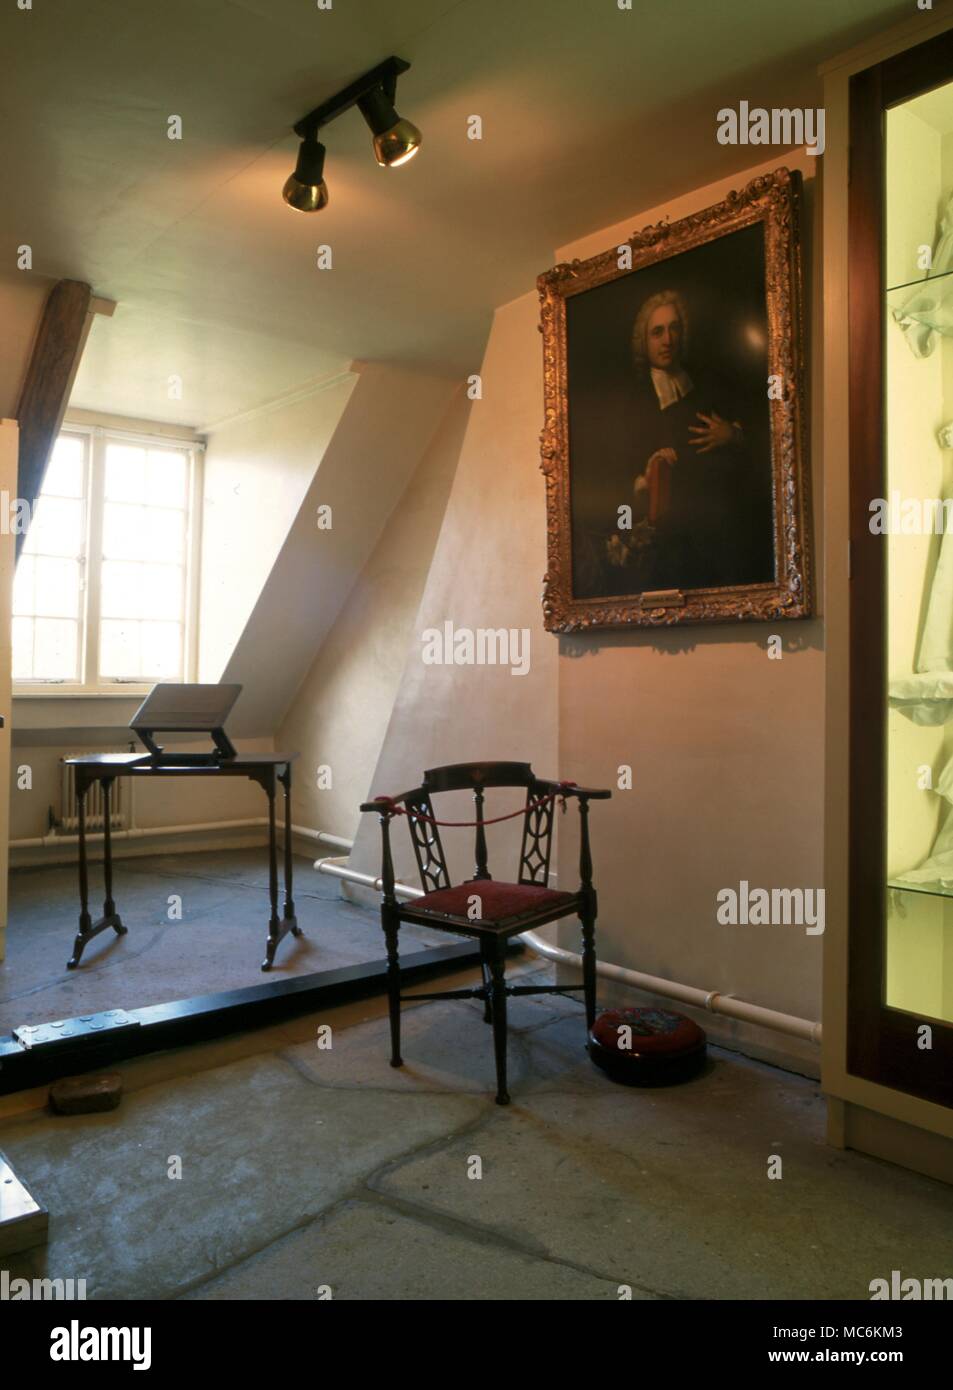 Haunted places - Epworth. Old Jeffrey's room - the bedroom in which the poltergeist activity in the Old Rectory was first experienced in 1715.Later, most of the rooms were subject to these disturbances. Stock Photo